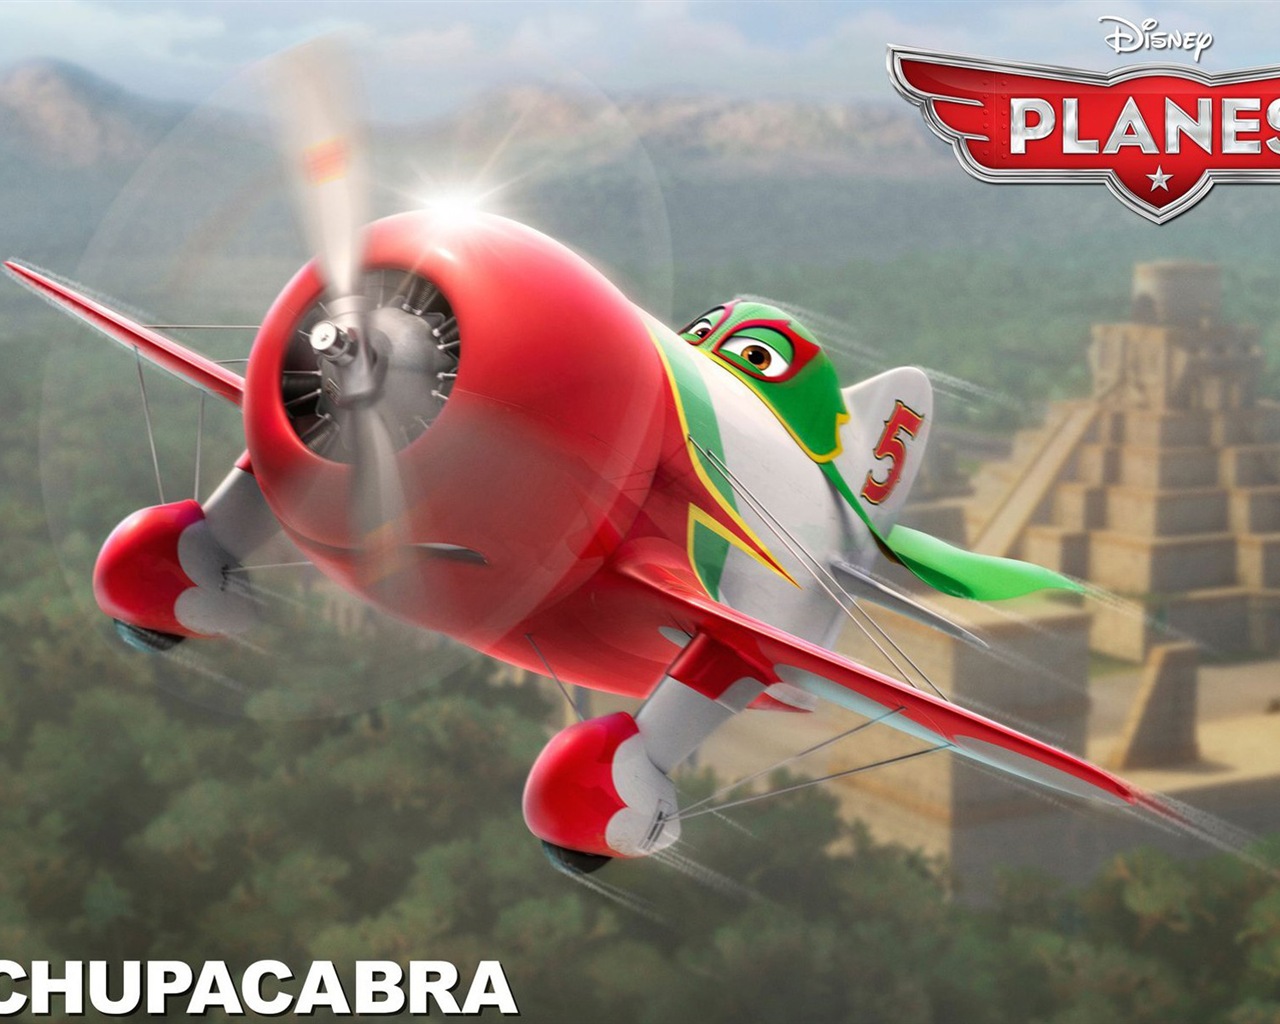 Planes 2013 HD wallpapers #17 - 1280x1024